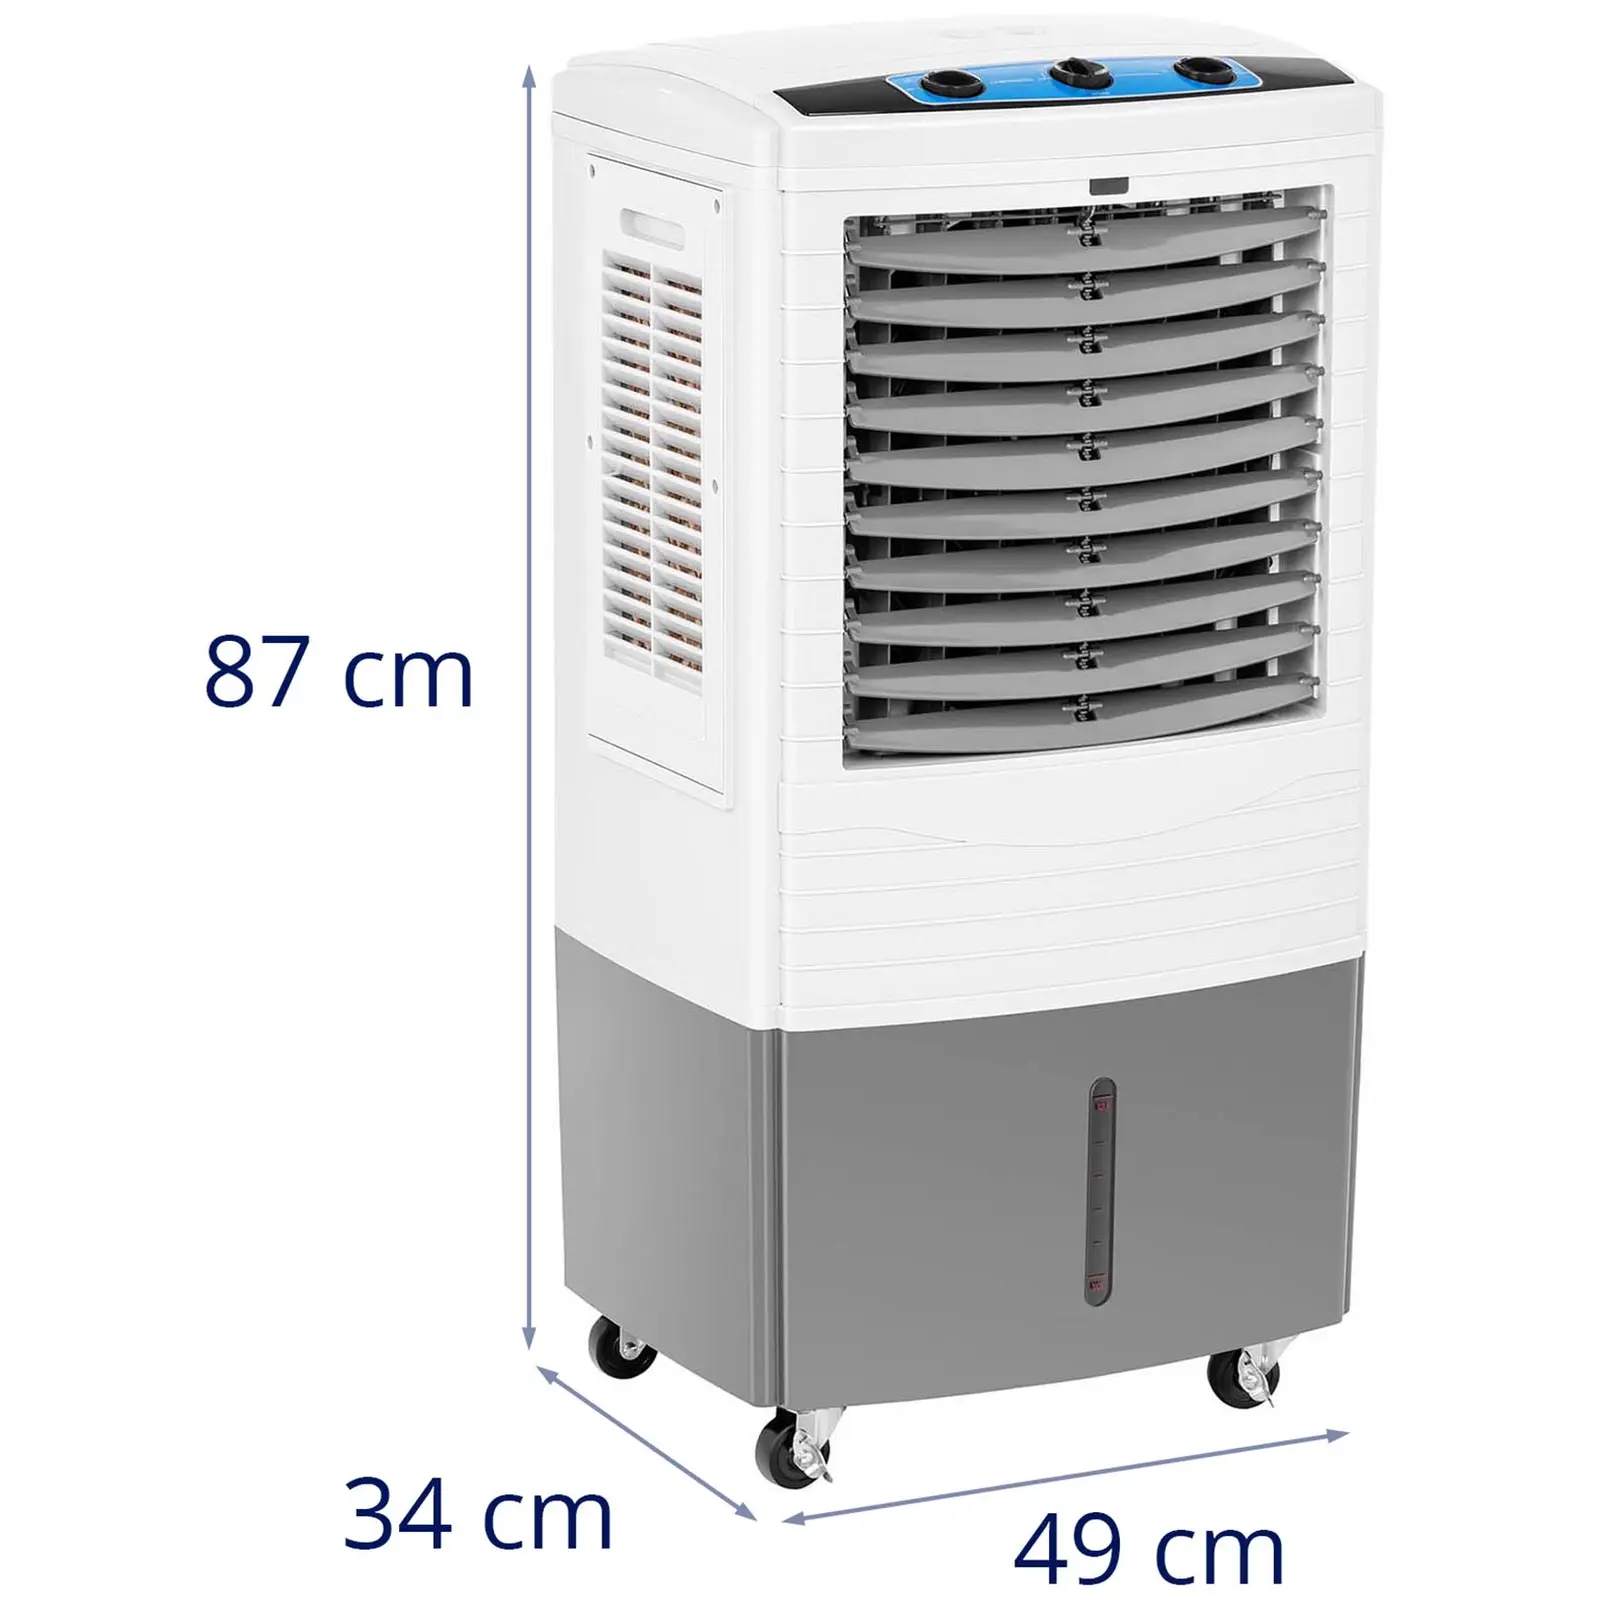 Air Cooler - 40 L water tank - remote control - 3-in-1